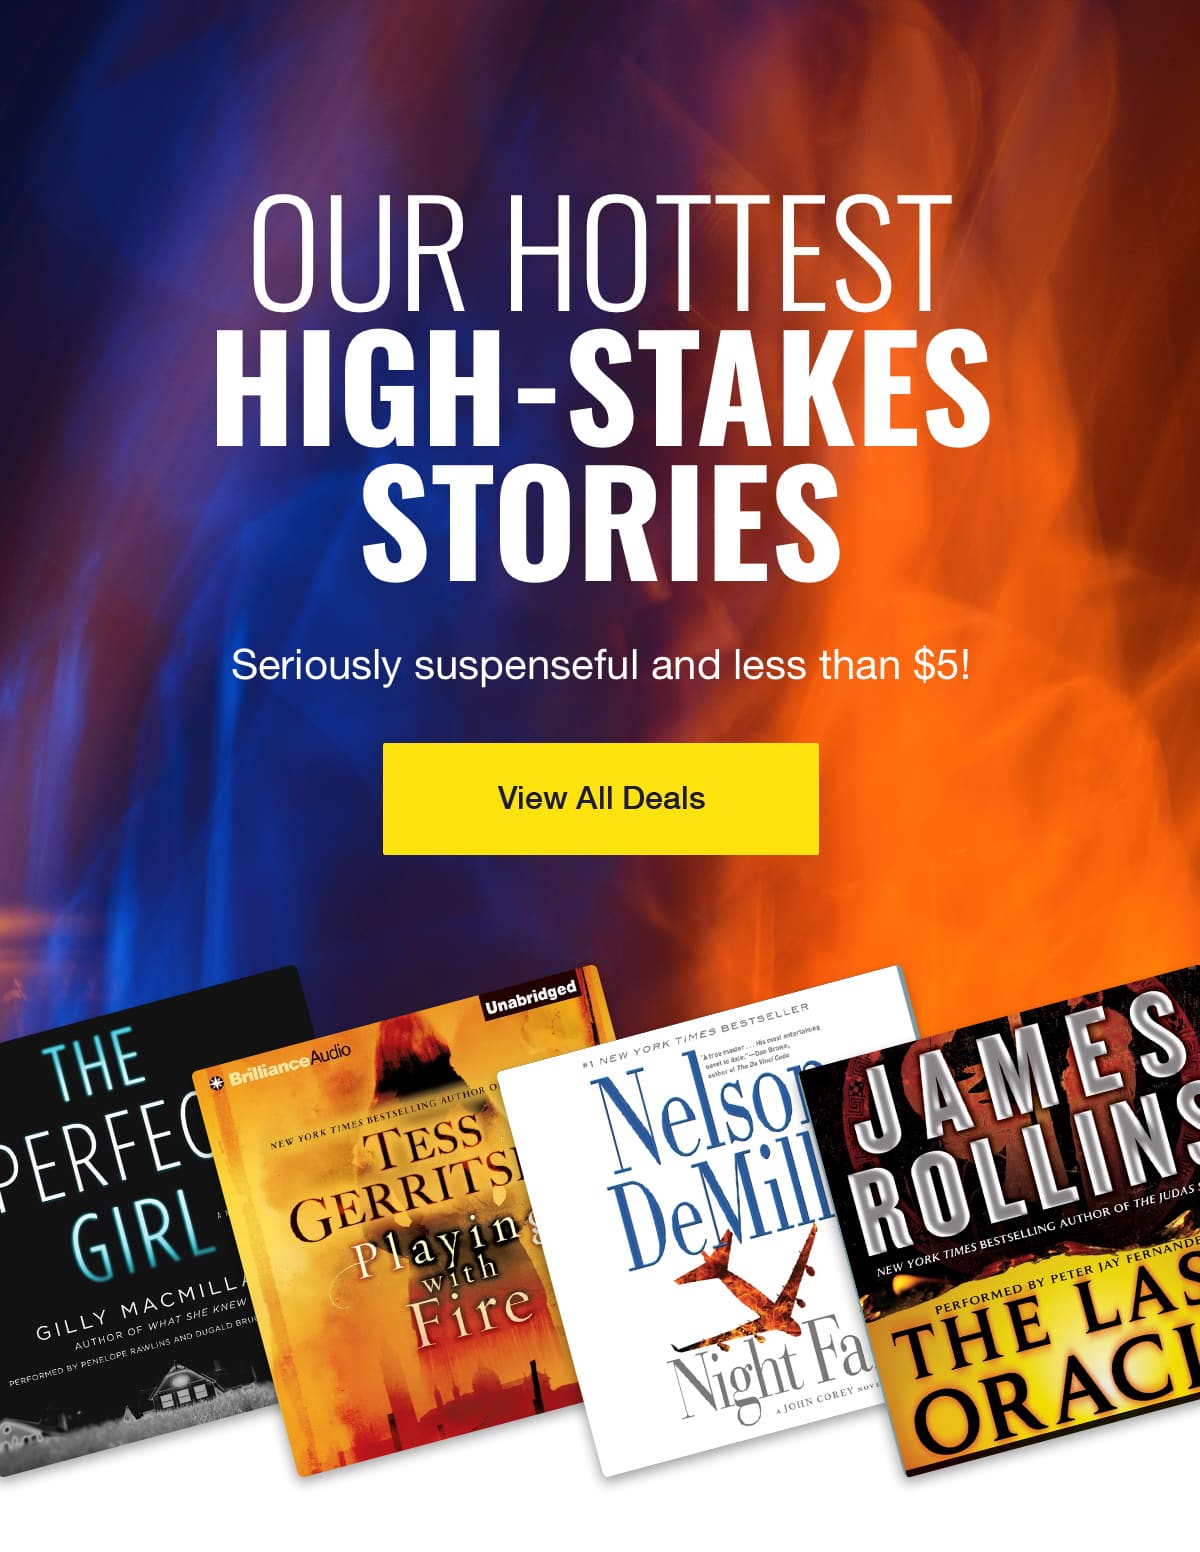 Our hottest high-stakes stories